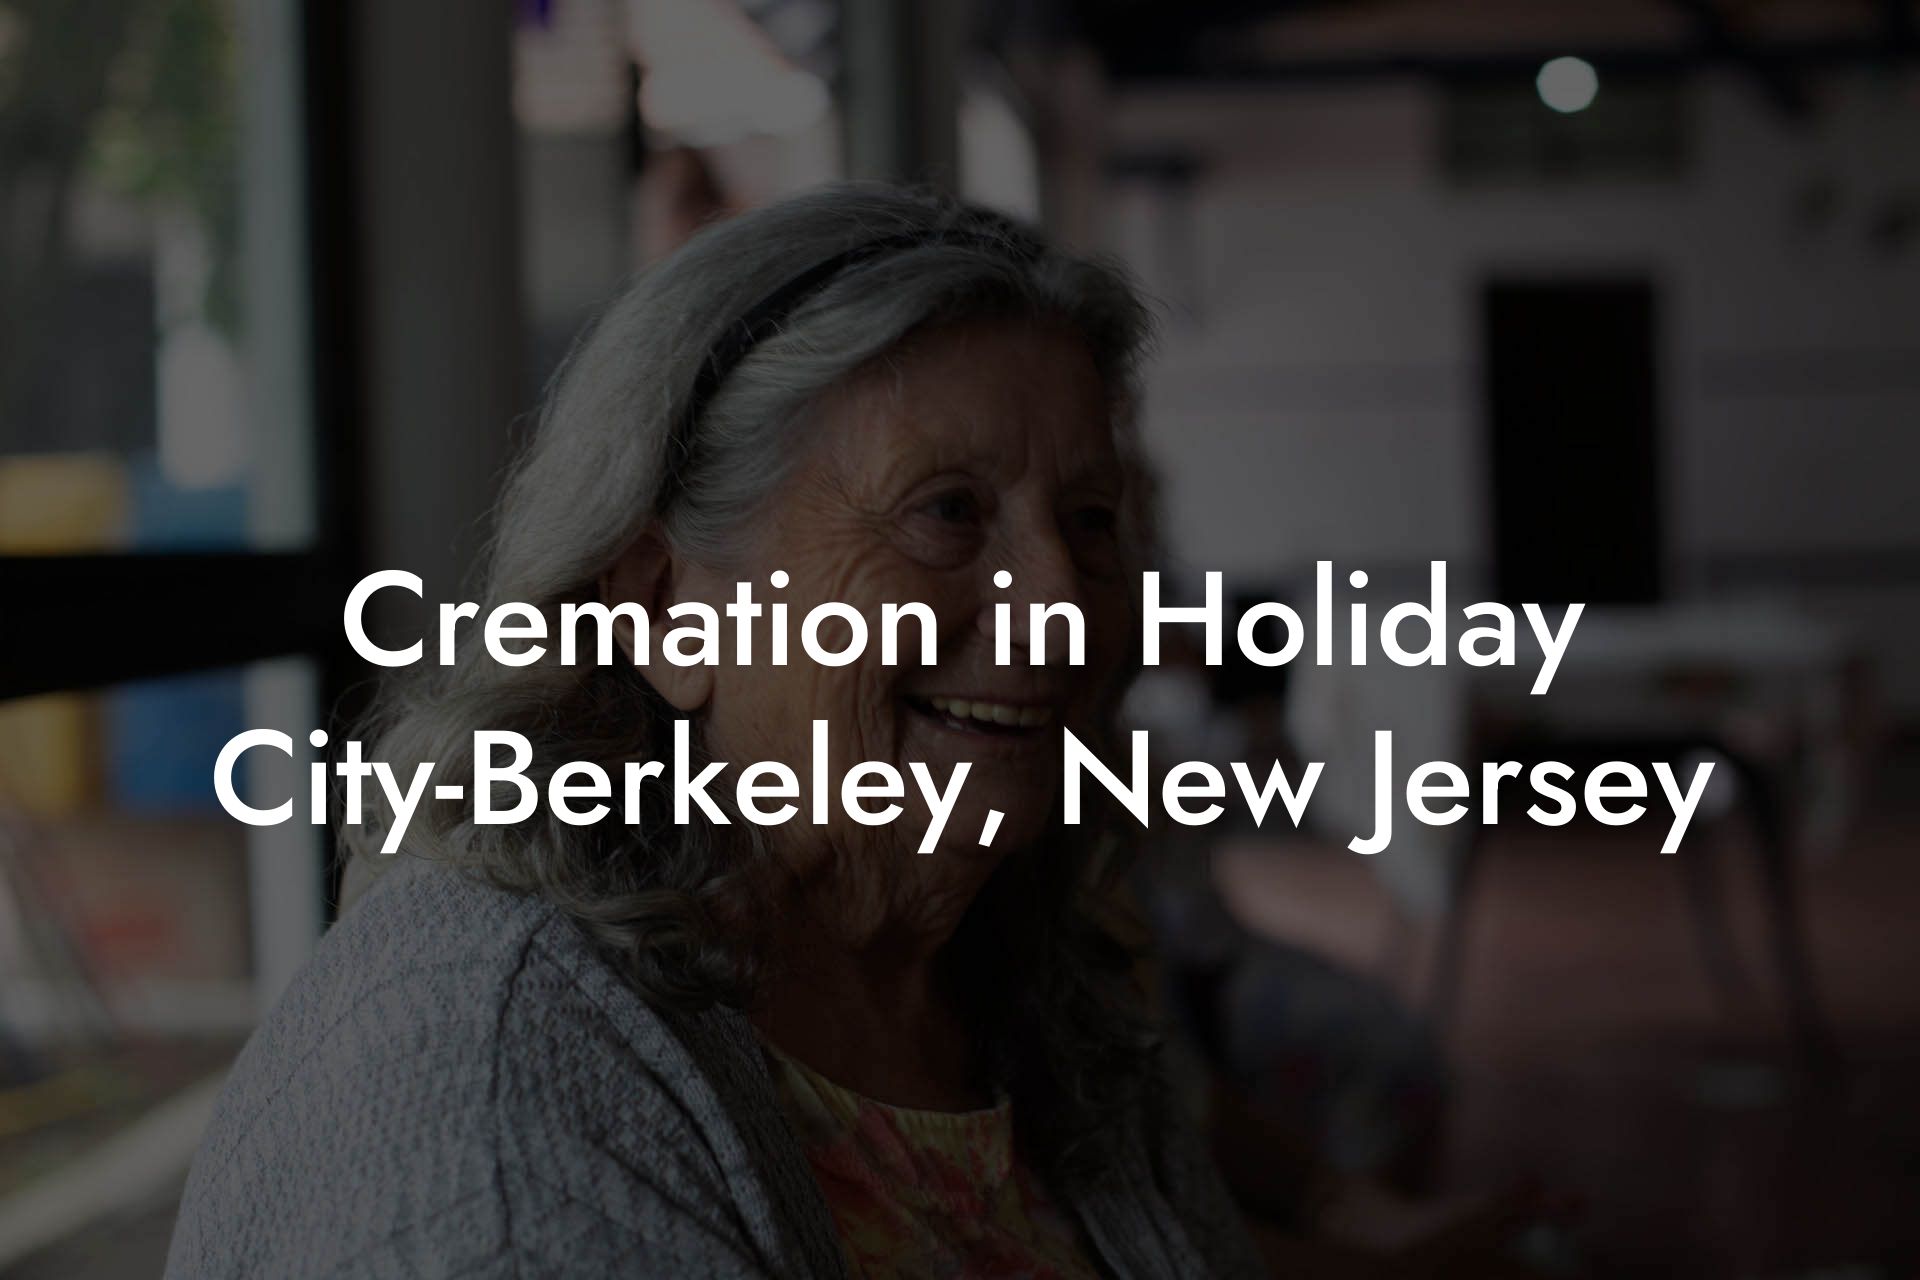 Cremation in Holiday City-Berkeley, New Jersey